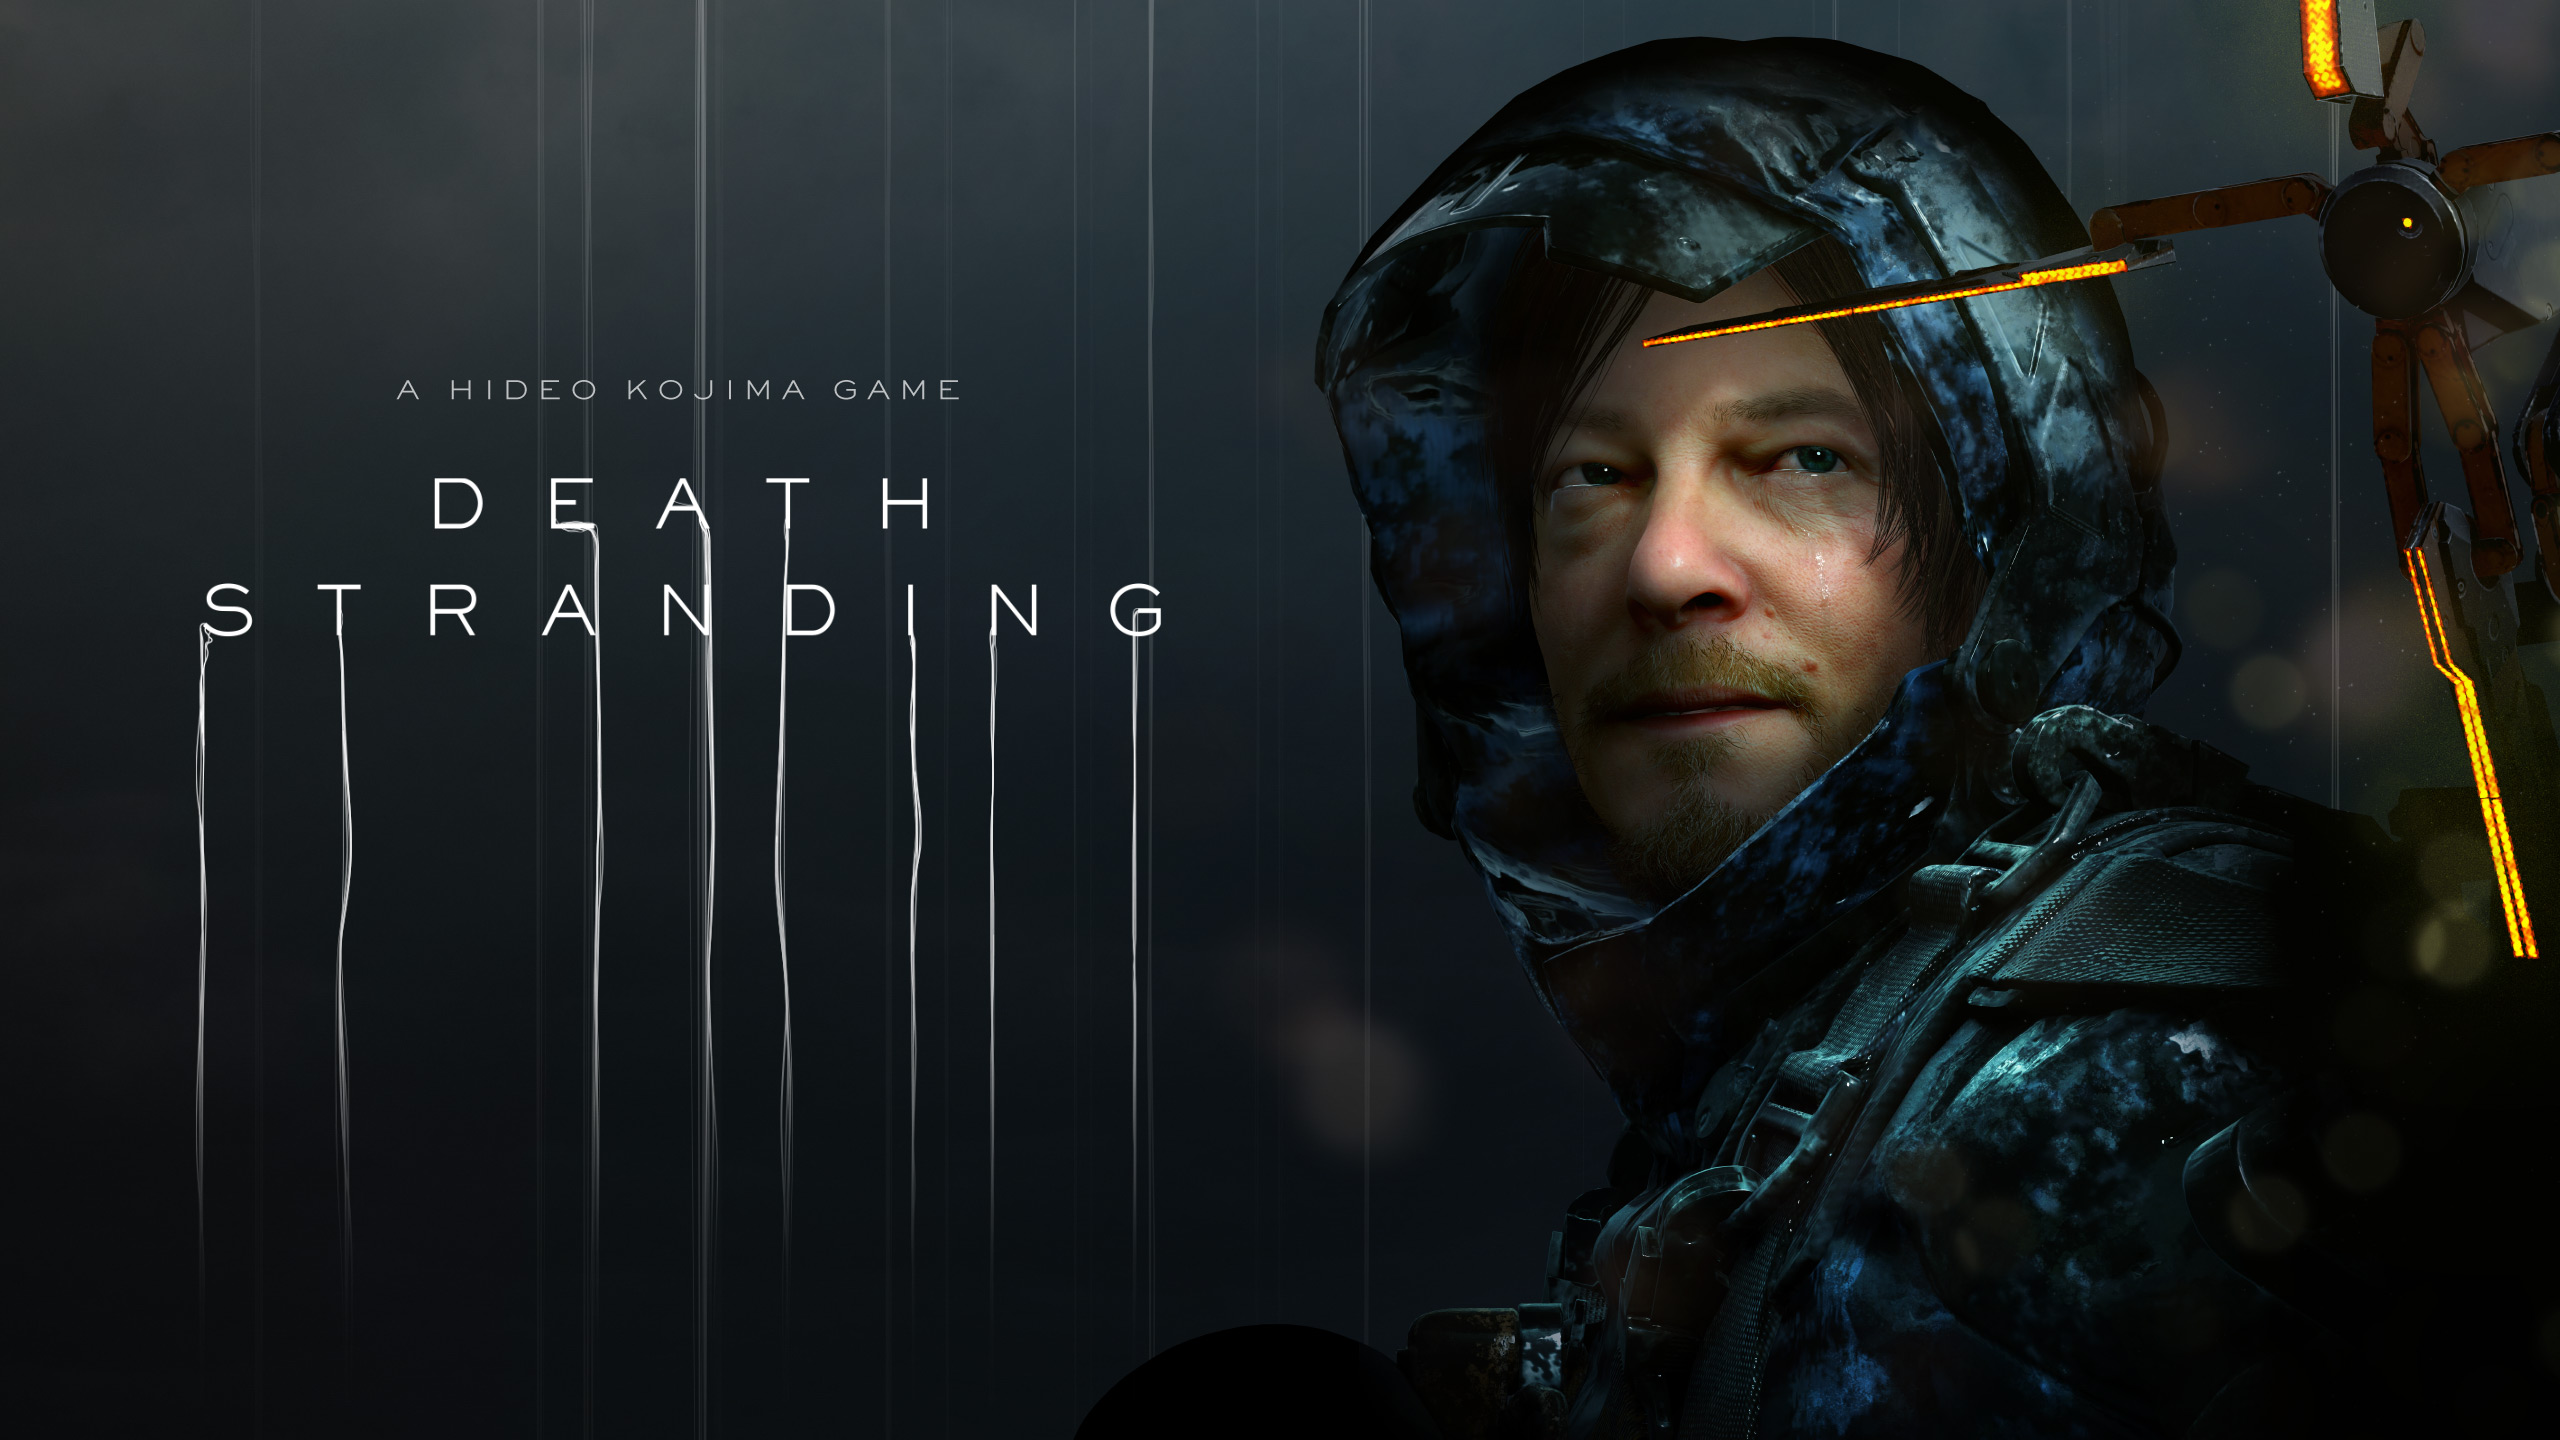 DEATH STRANDING / Online Steam / Full Access / Warranty / Inactive / Gift